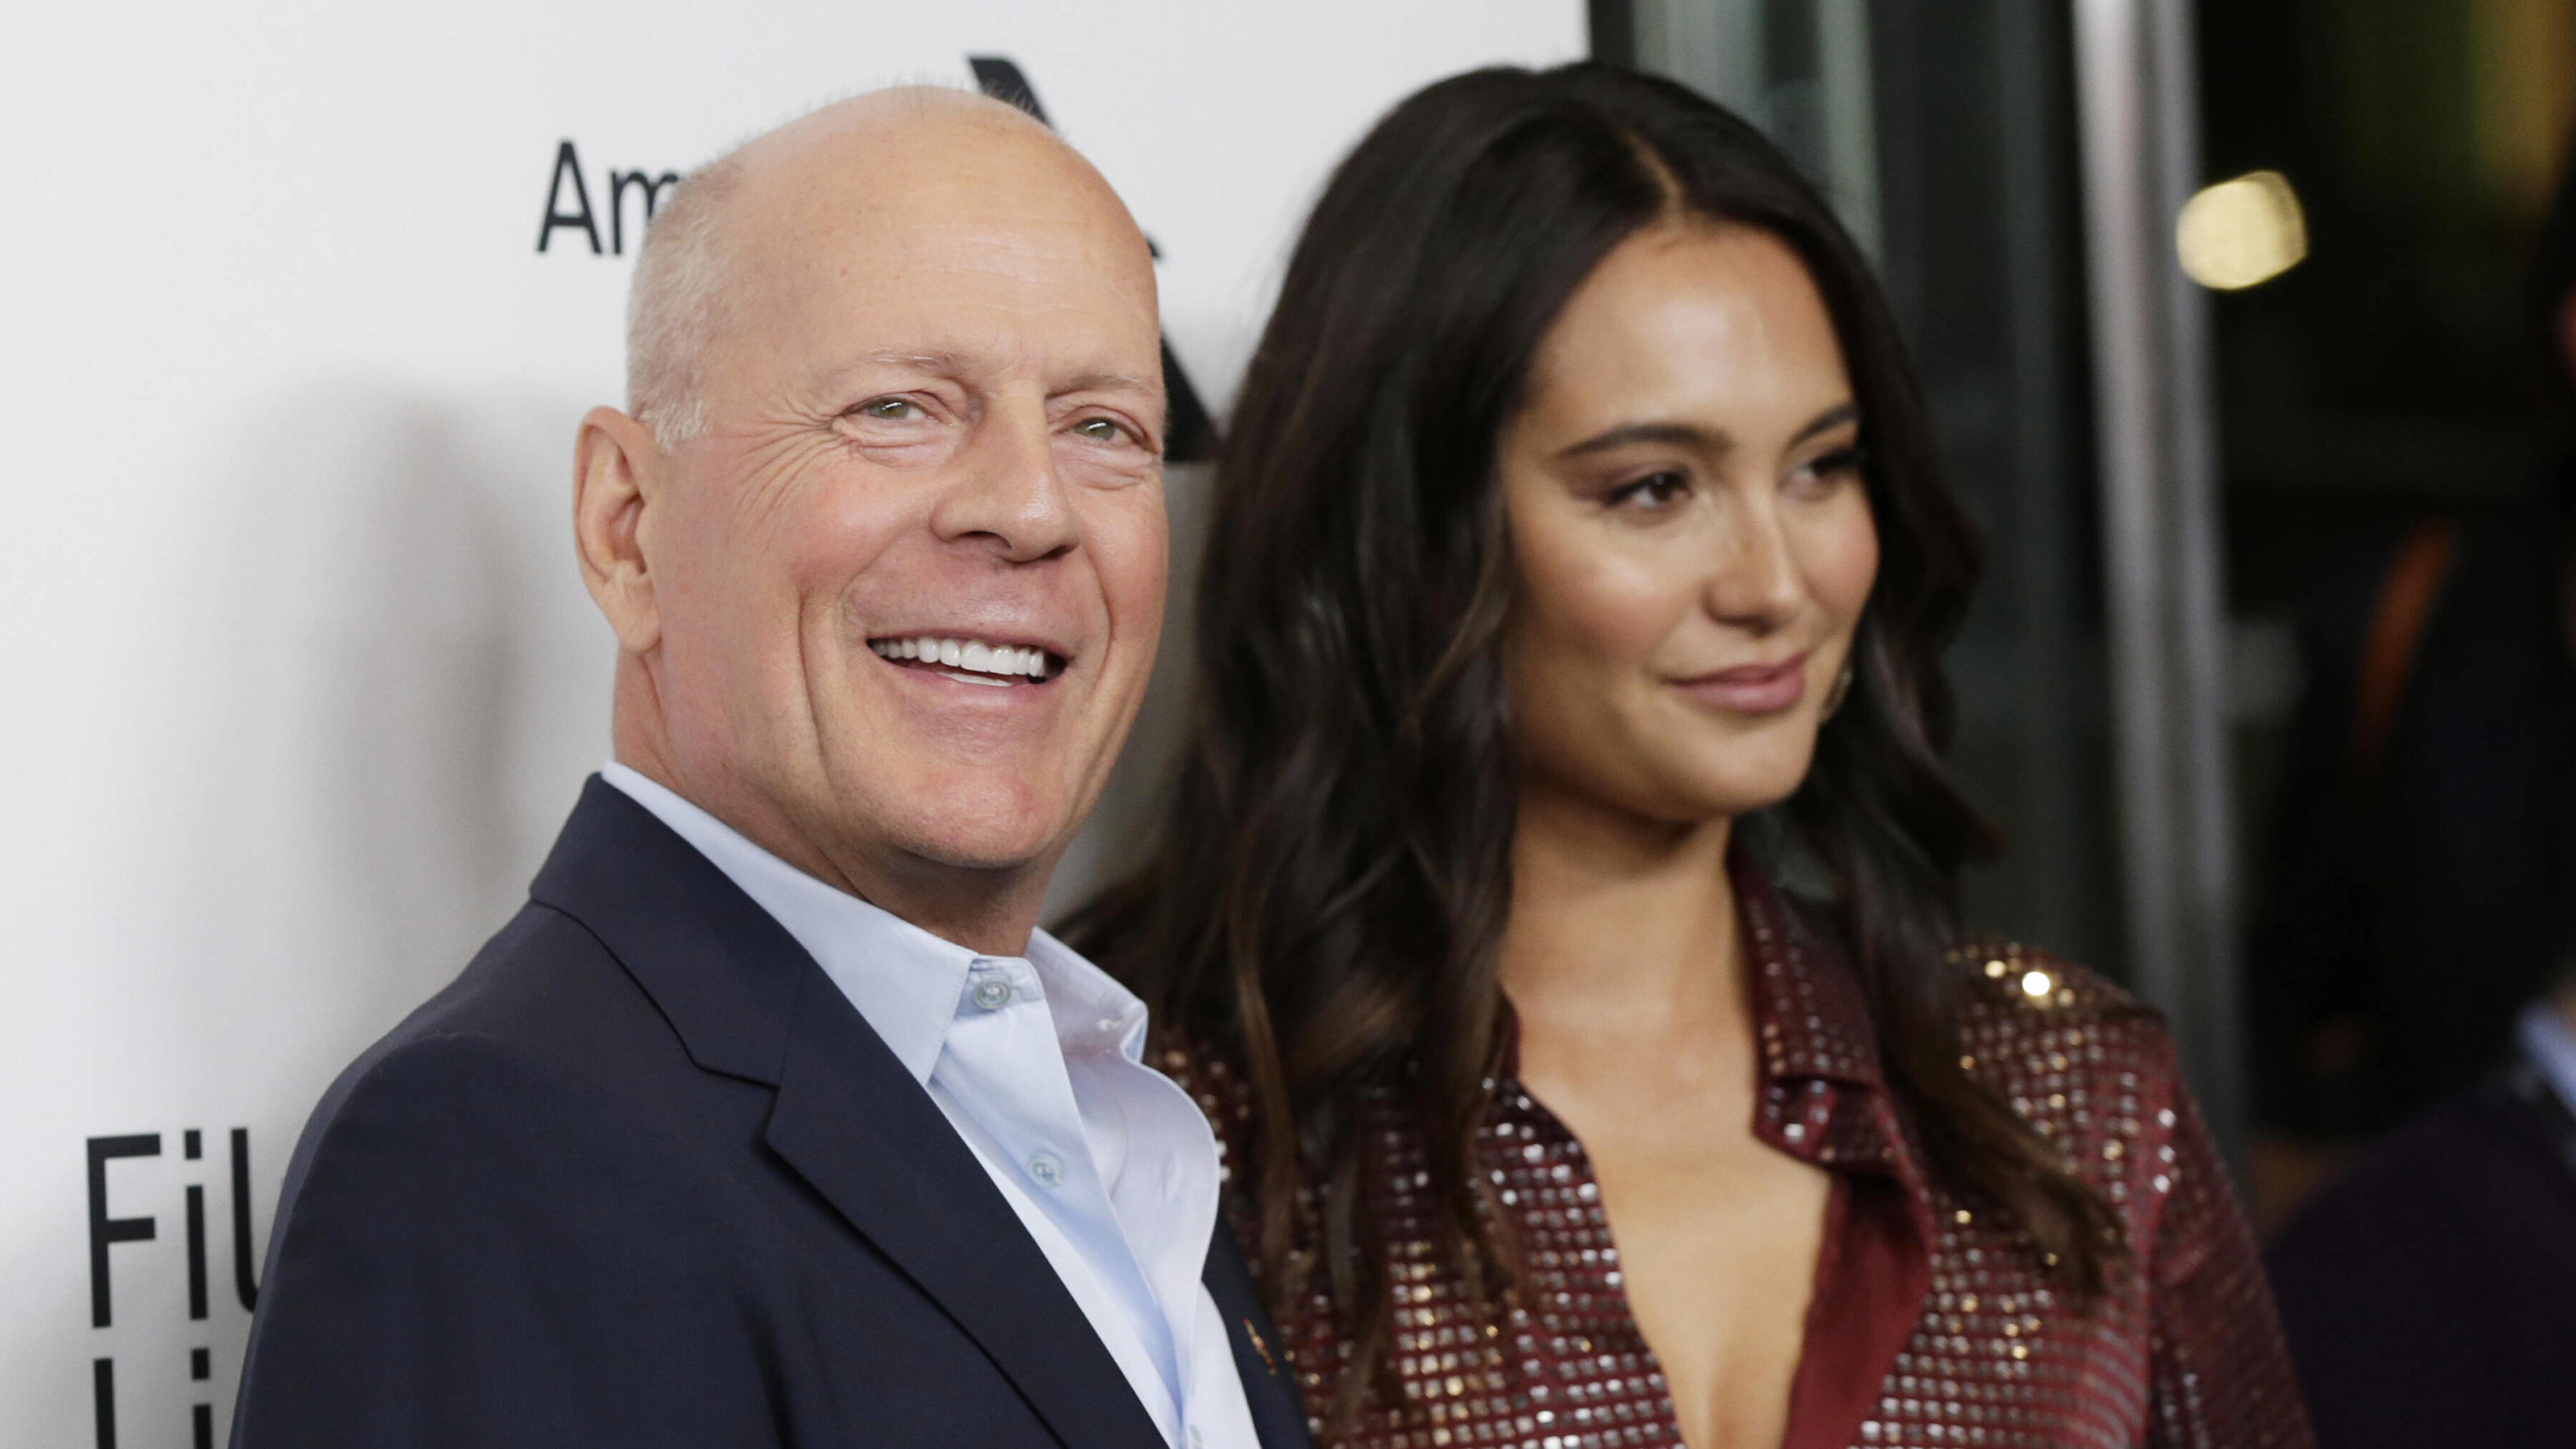  Bruce Willis and wife Emma Heming Willis arrive on the red carpet at the Motherless Brooklyn premiere during the 57th New York Film Festival in New York City on Friday, October 11, 2019. PUBLICATIONxINxGERxSUIxAUTxHUNxONLY NYP20191011129 JOHNxANGELI